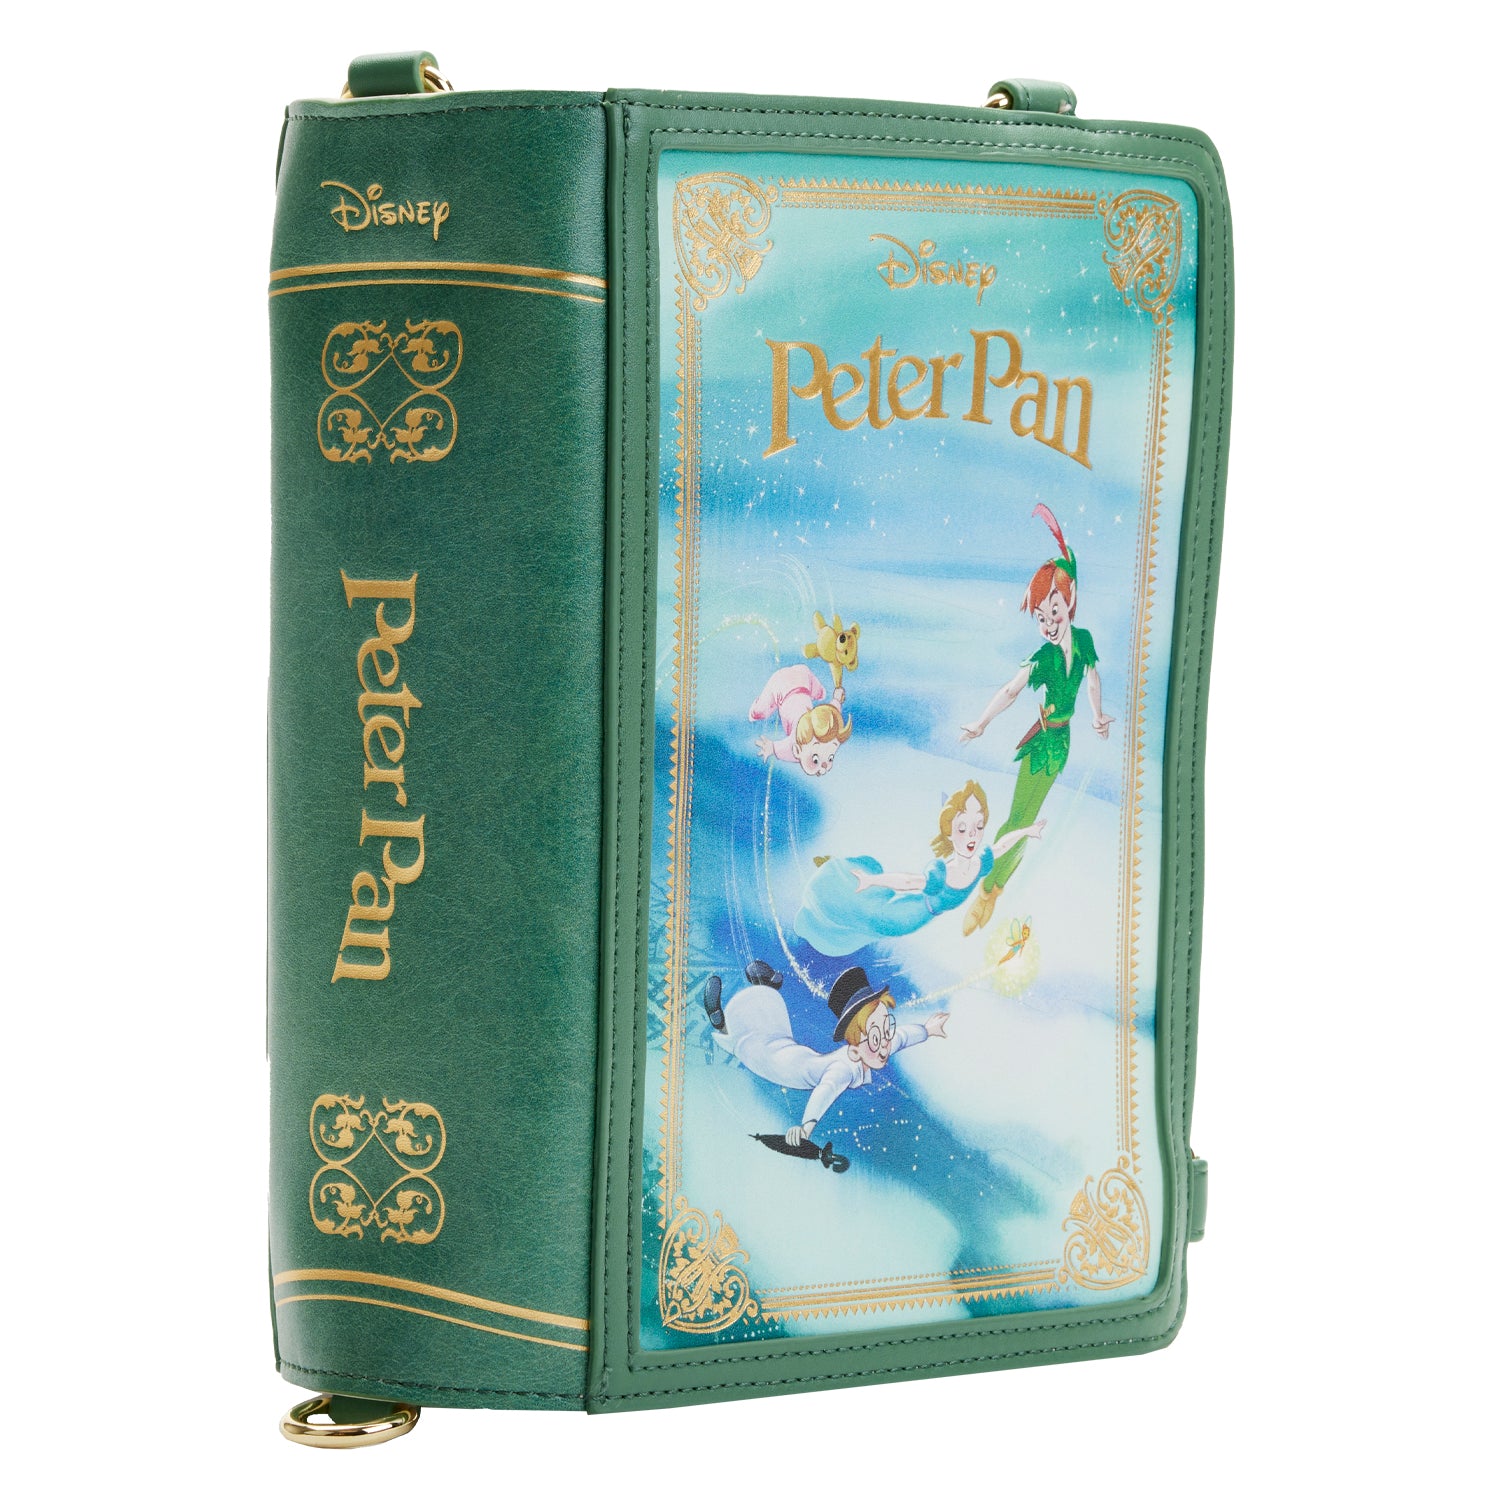 Peter Pan: Book Series Loungefly Convertible Backpack